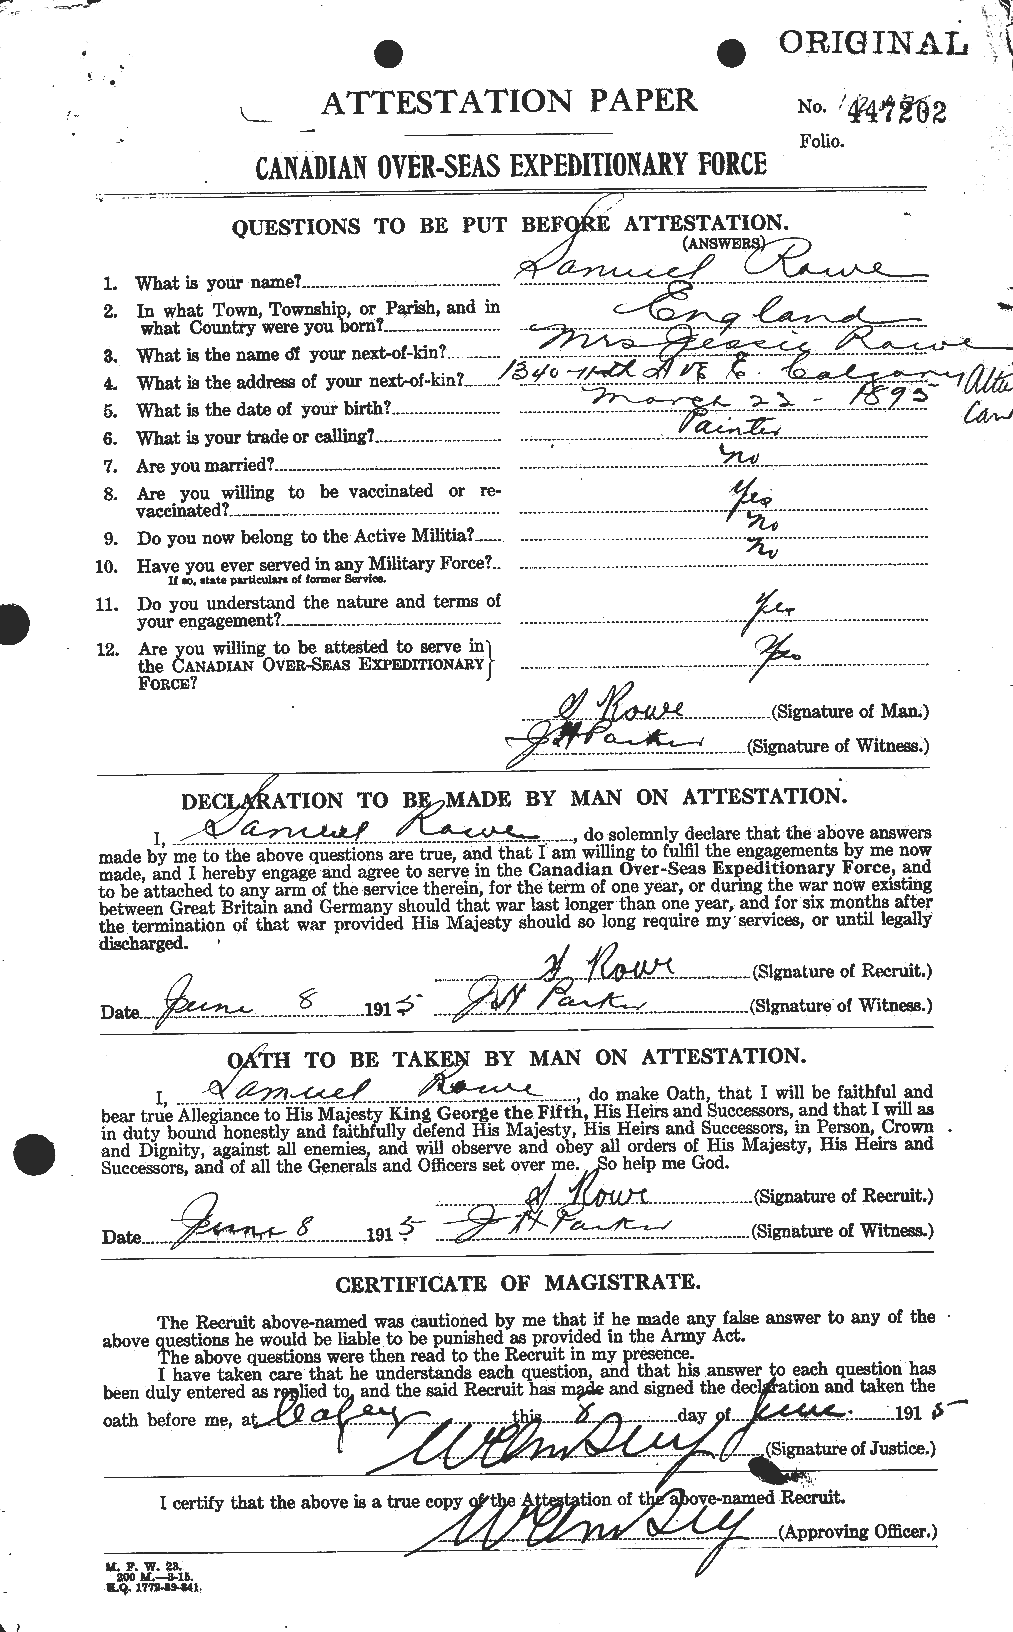 Personnel Records of the First World War - CEF 615981a